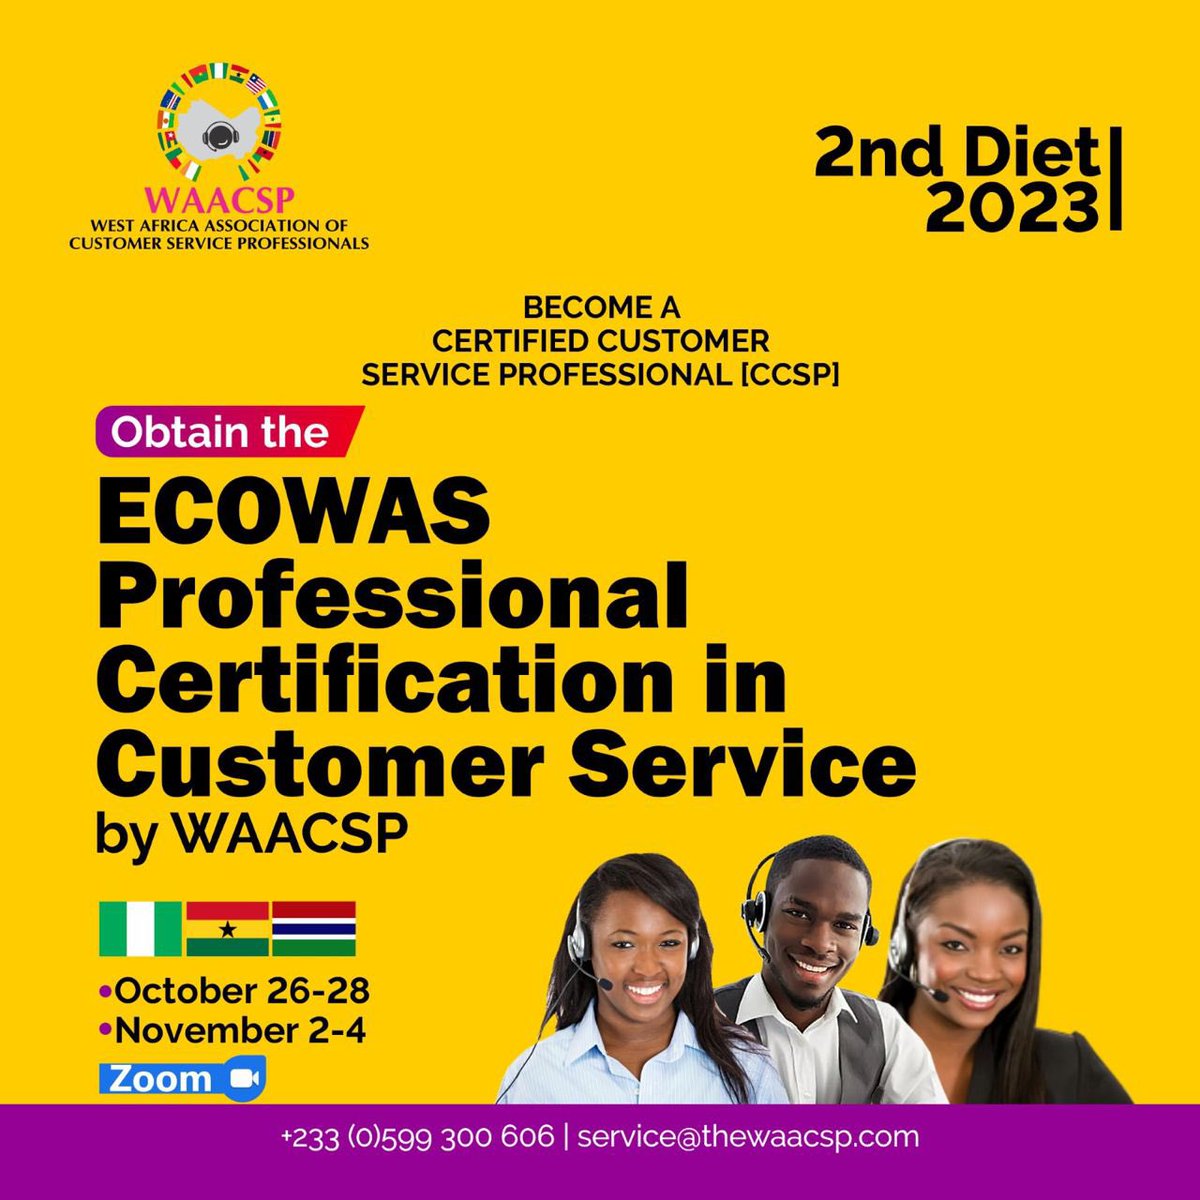 GOOD NEWS!! The last diet for 2023 of the ECOWAS-WAACSP professional certification in customer service comes up this October Click this link 👇🏾to read details here: thewaacsp.com/english/blog/2… If you missed the 1st diet in JUNE, here’s the last chance to earn this globally…